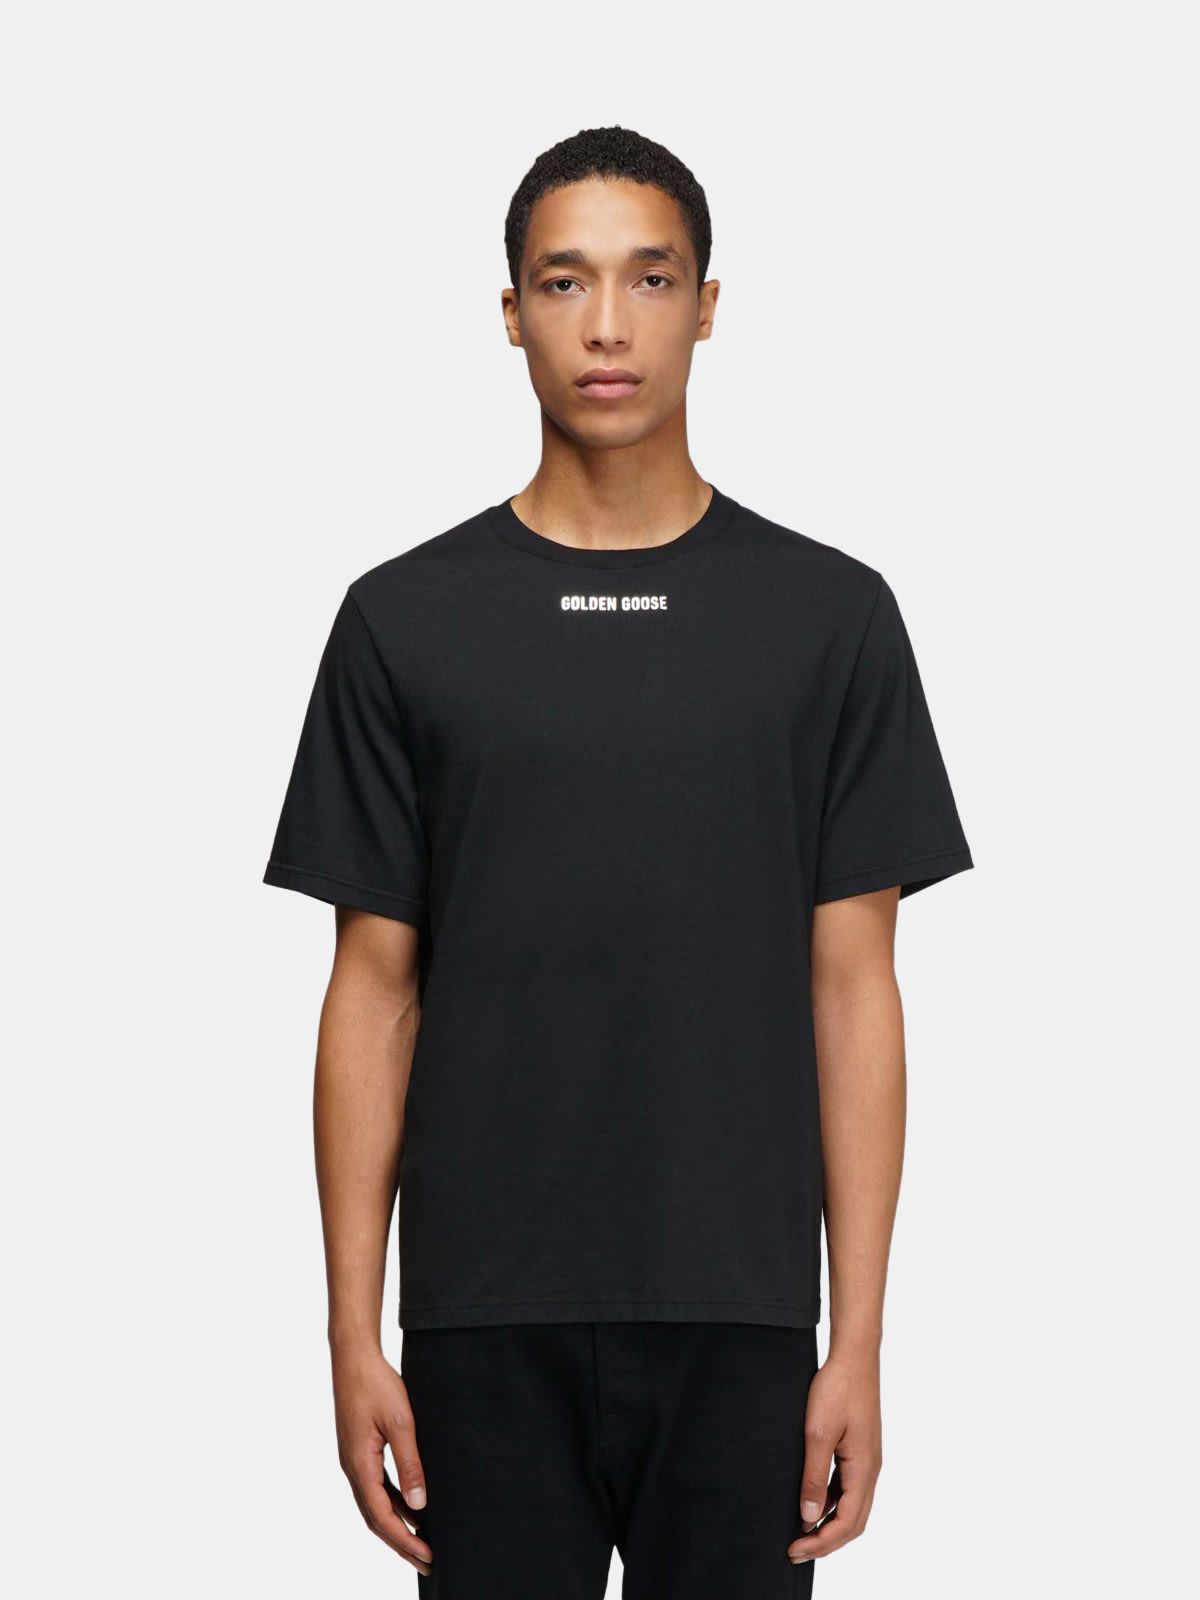 Black Golden T-shirt with print on the back